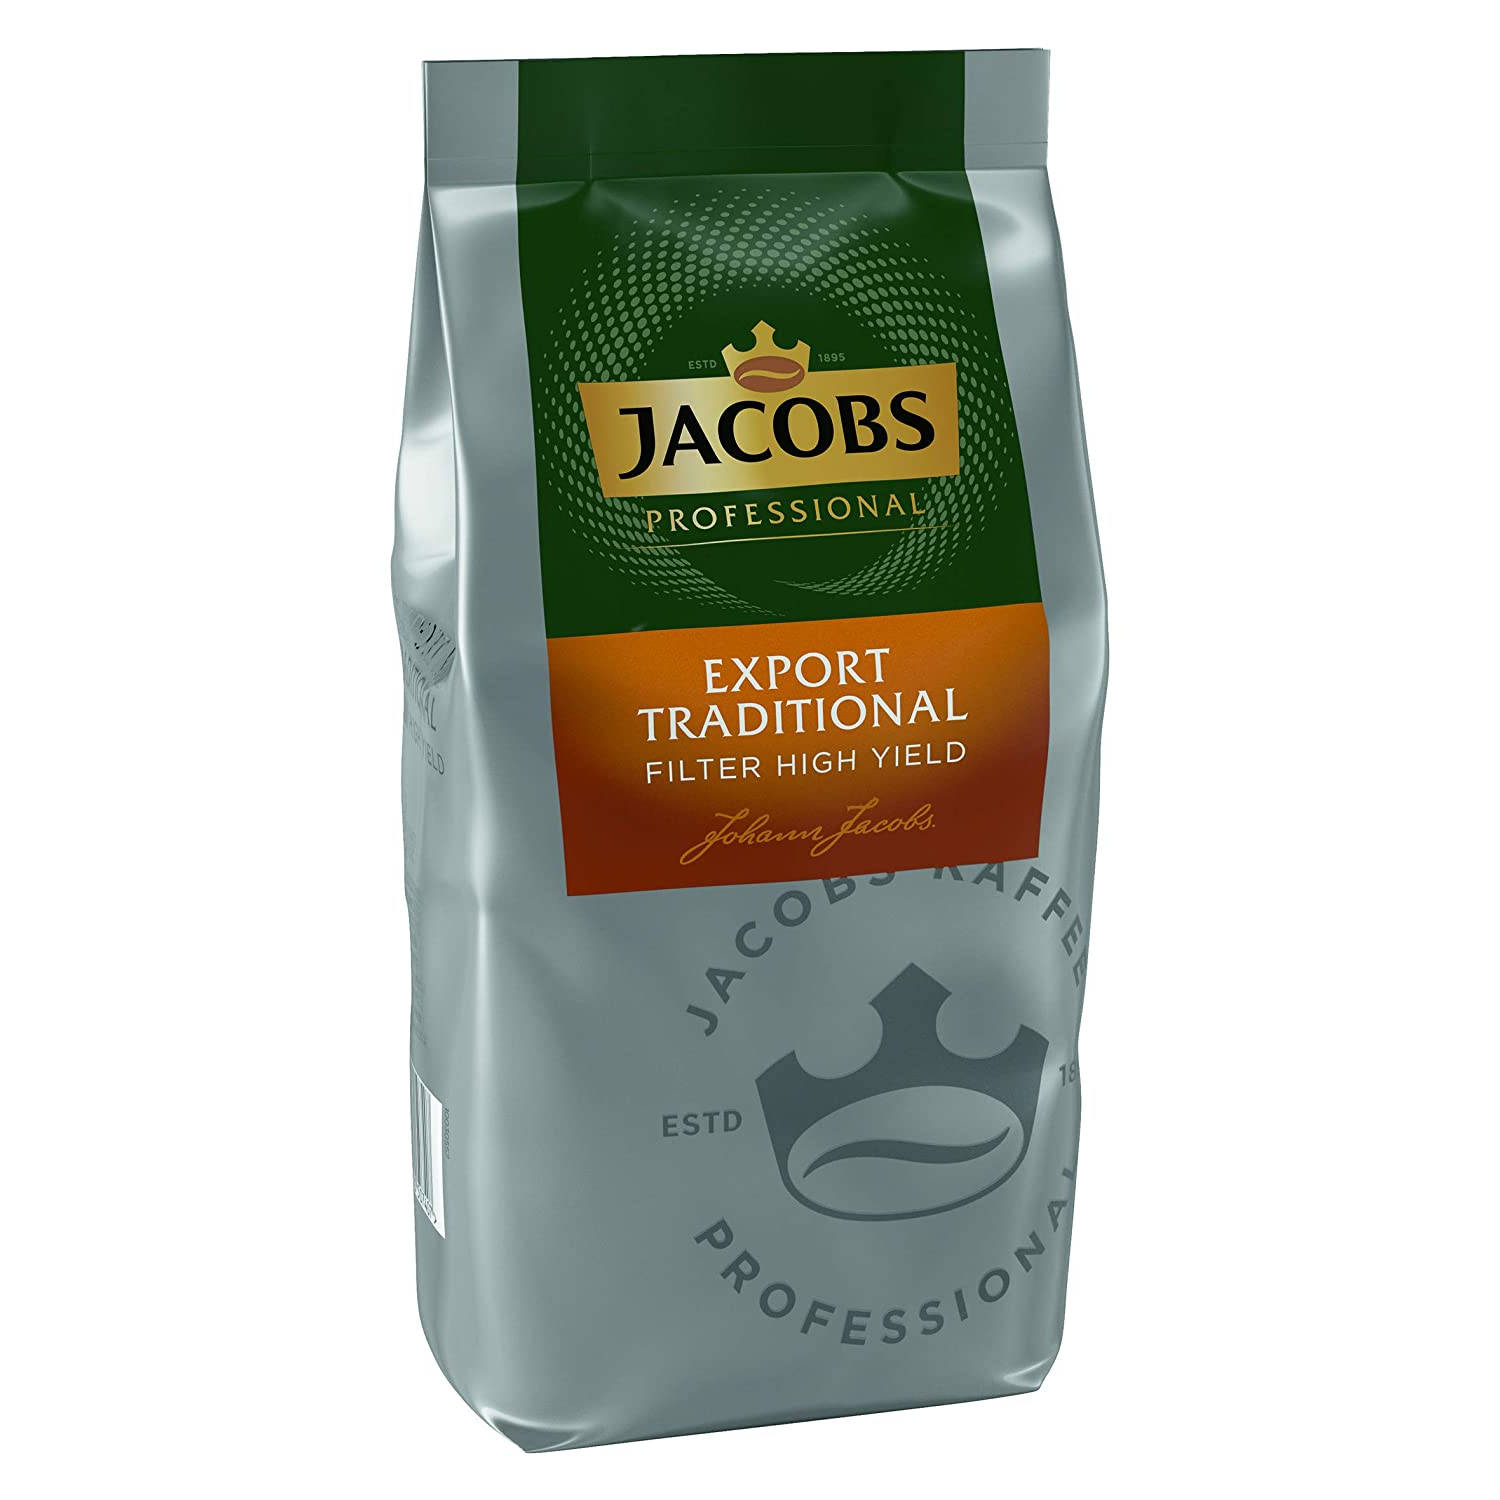 (Filter, HY JACOBS Filter-Kaffeemaschinen) French professionelle Professional Export Traditional g 10x800 Press, Filterkaffee